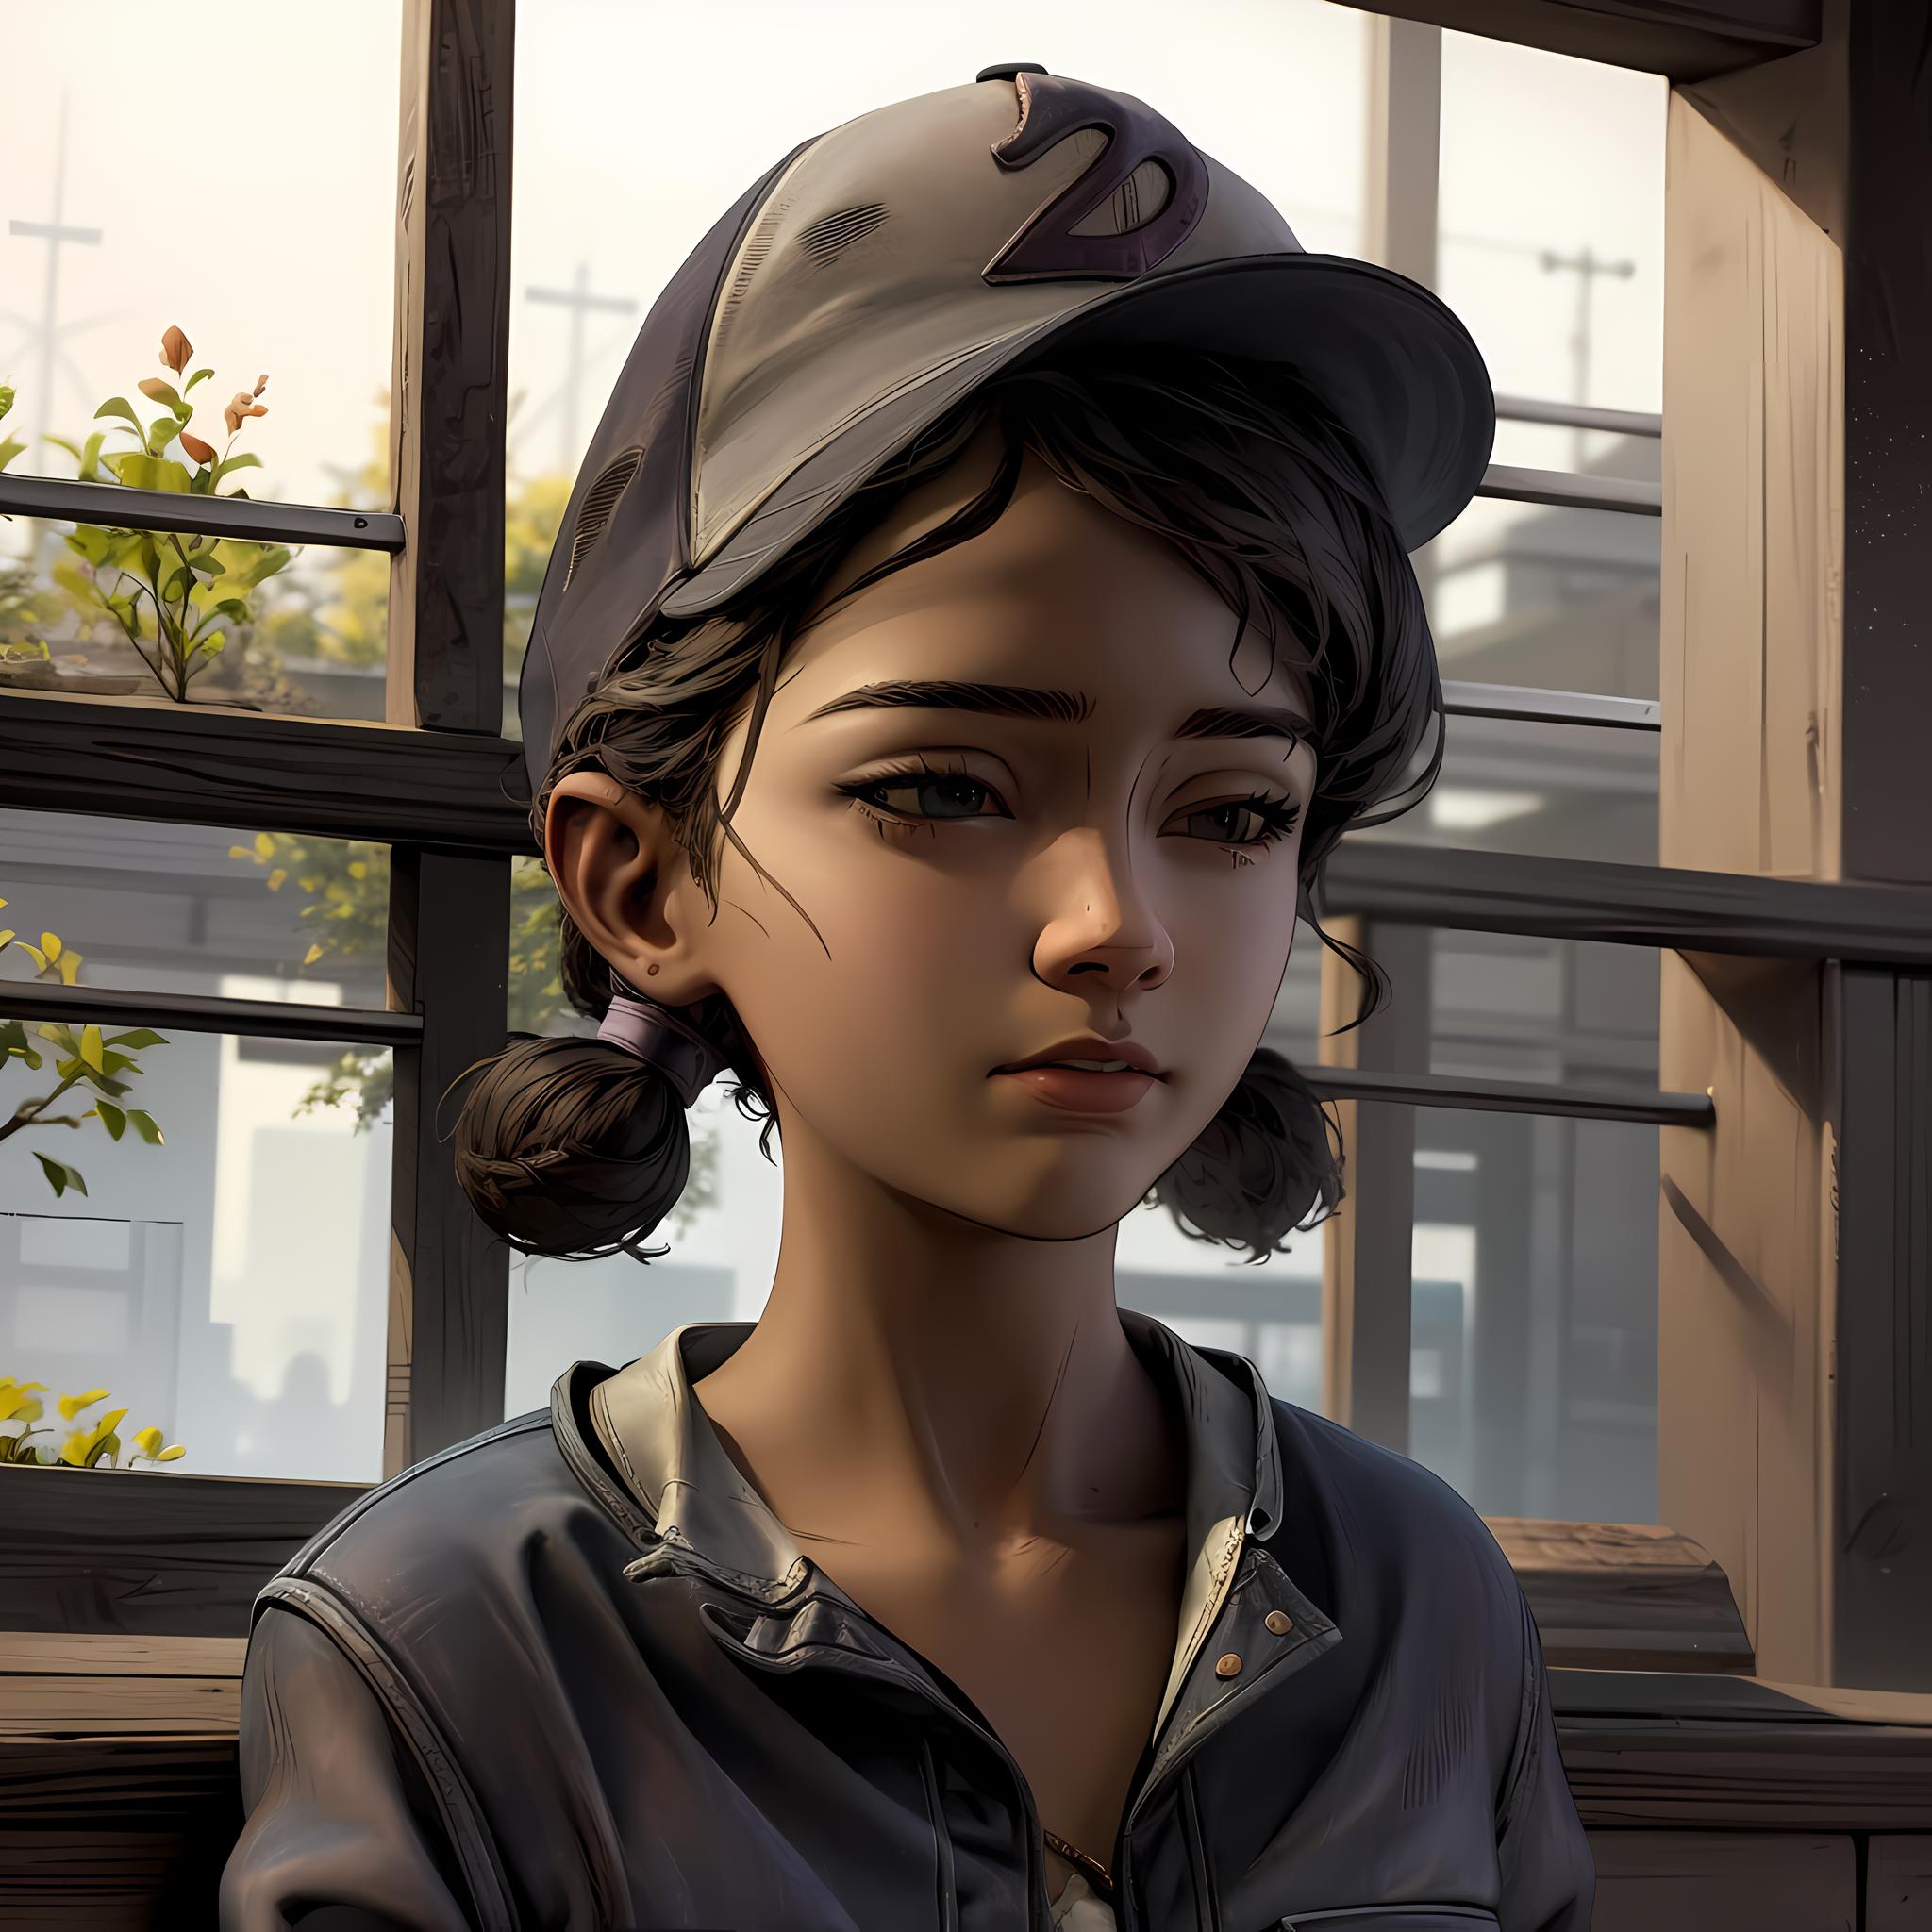 Clementine [The Walking Dead] image by TheGooder